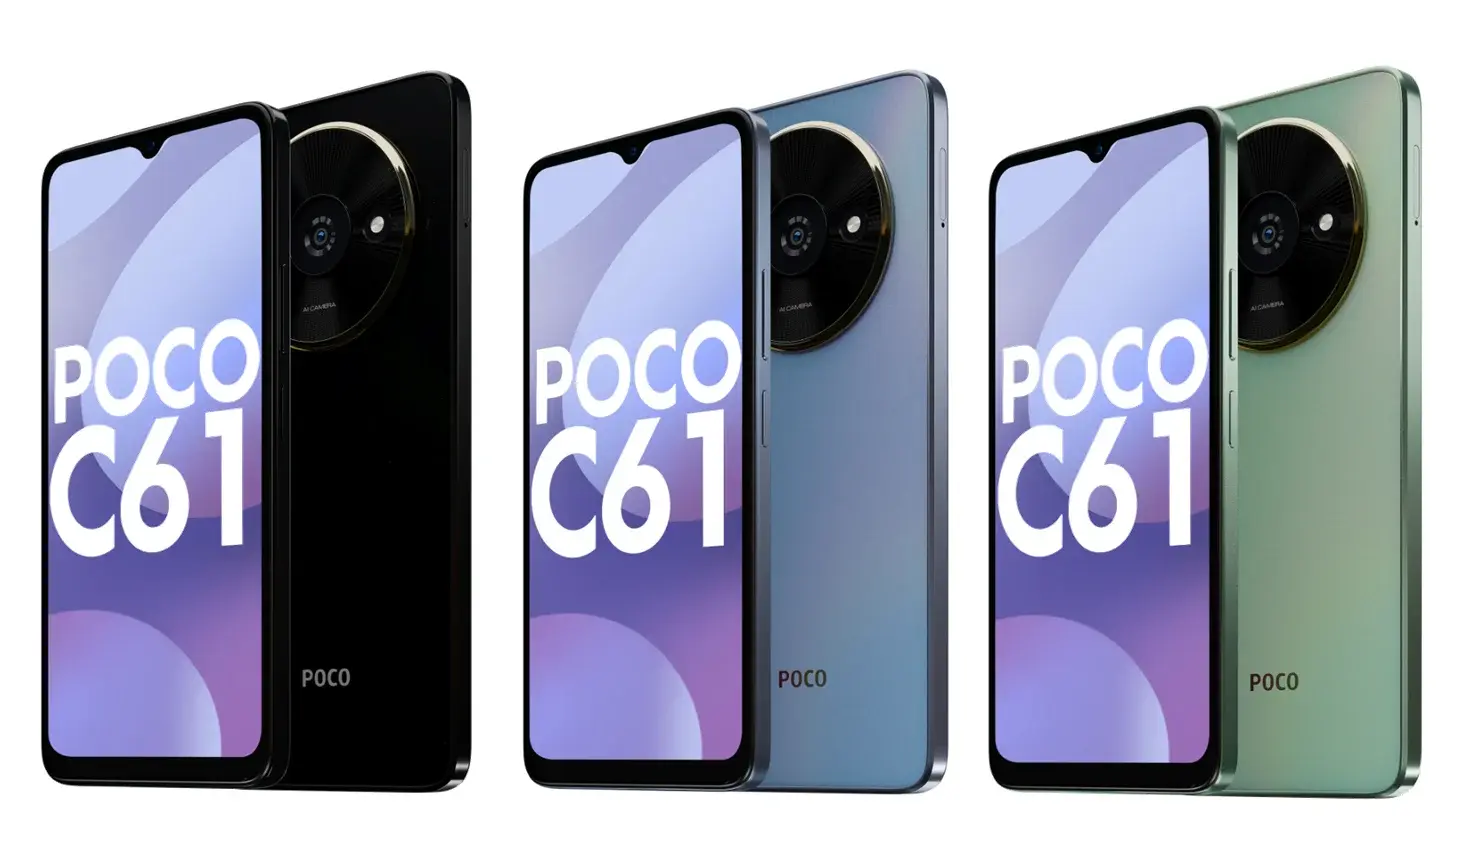 POCO C61 Design, Specifications & Pricing Leaked 